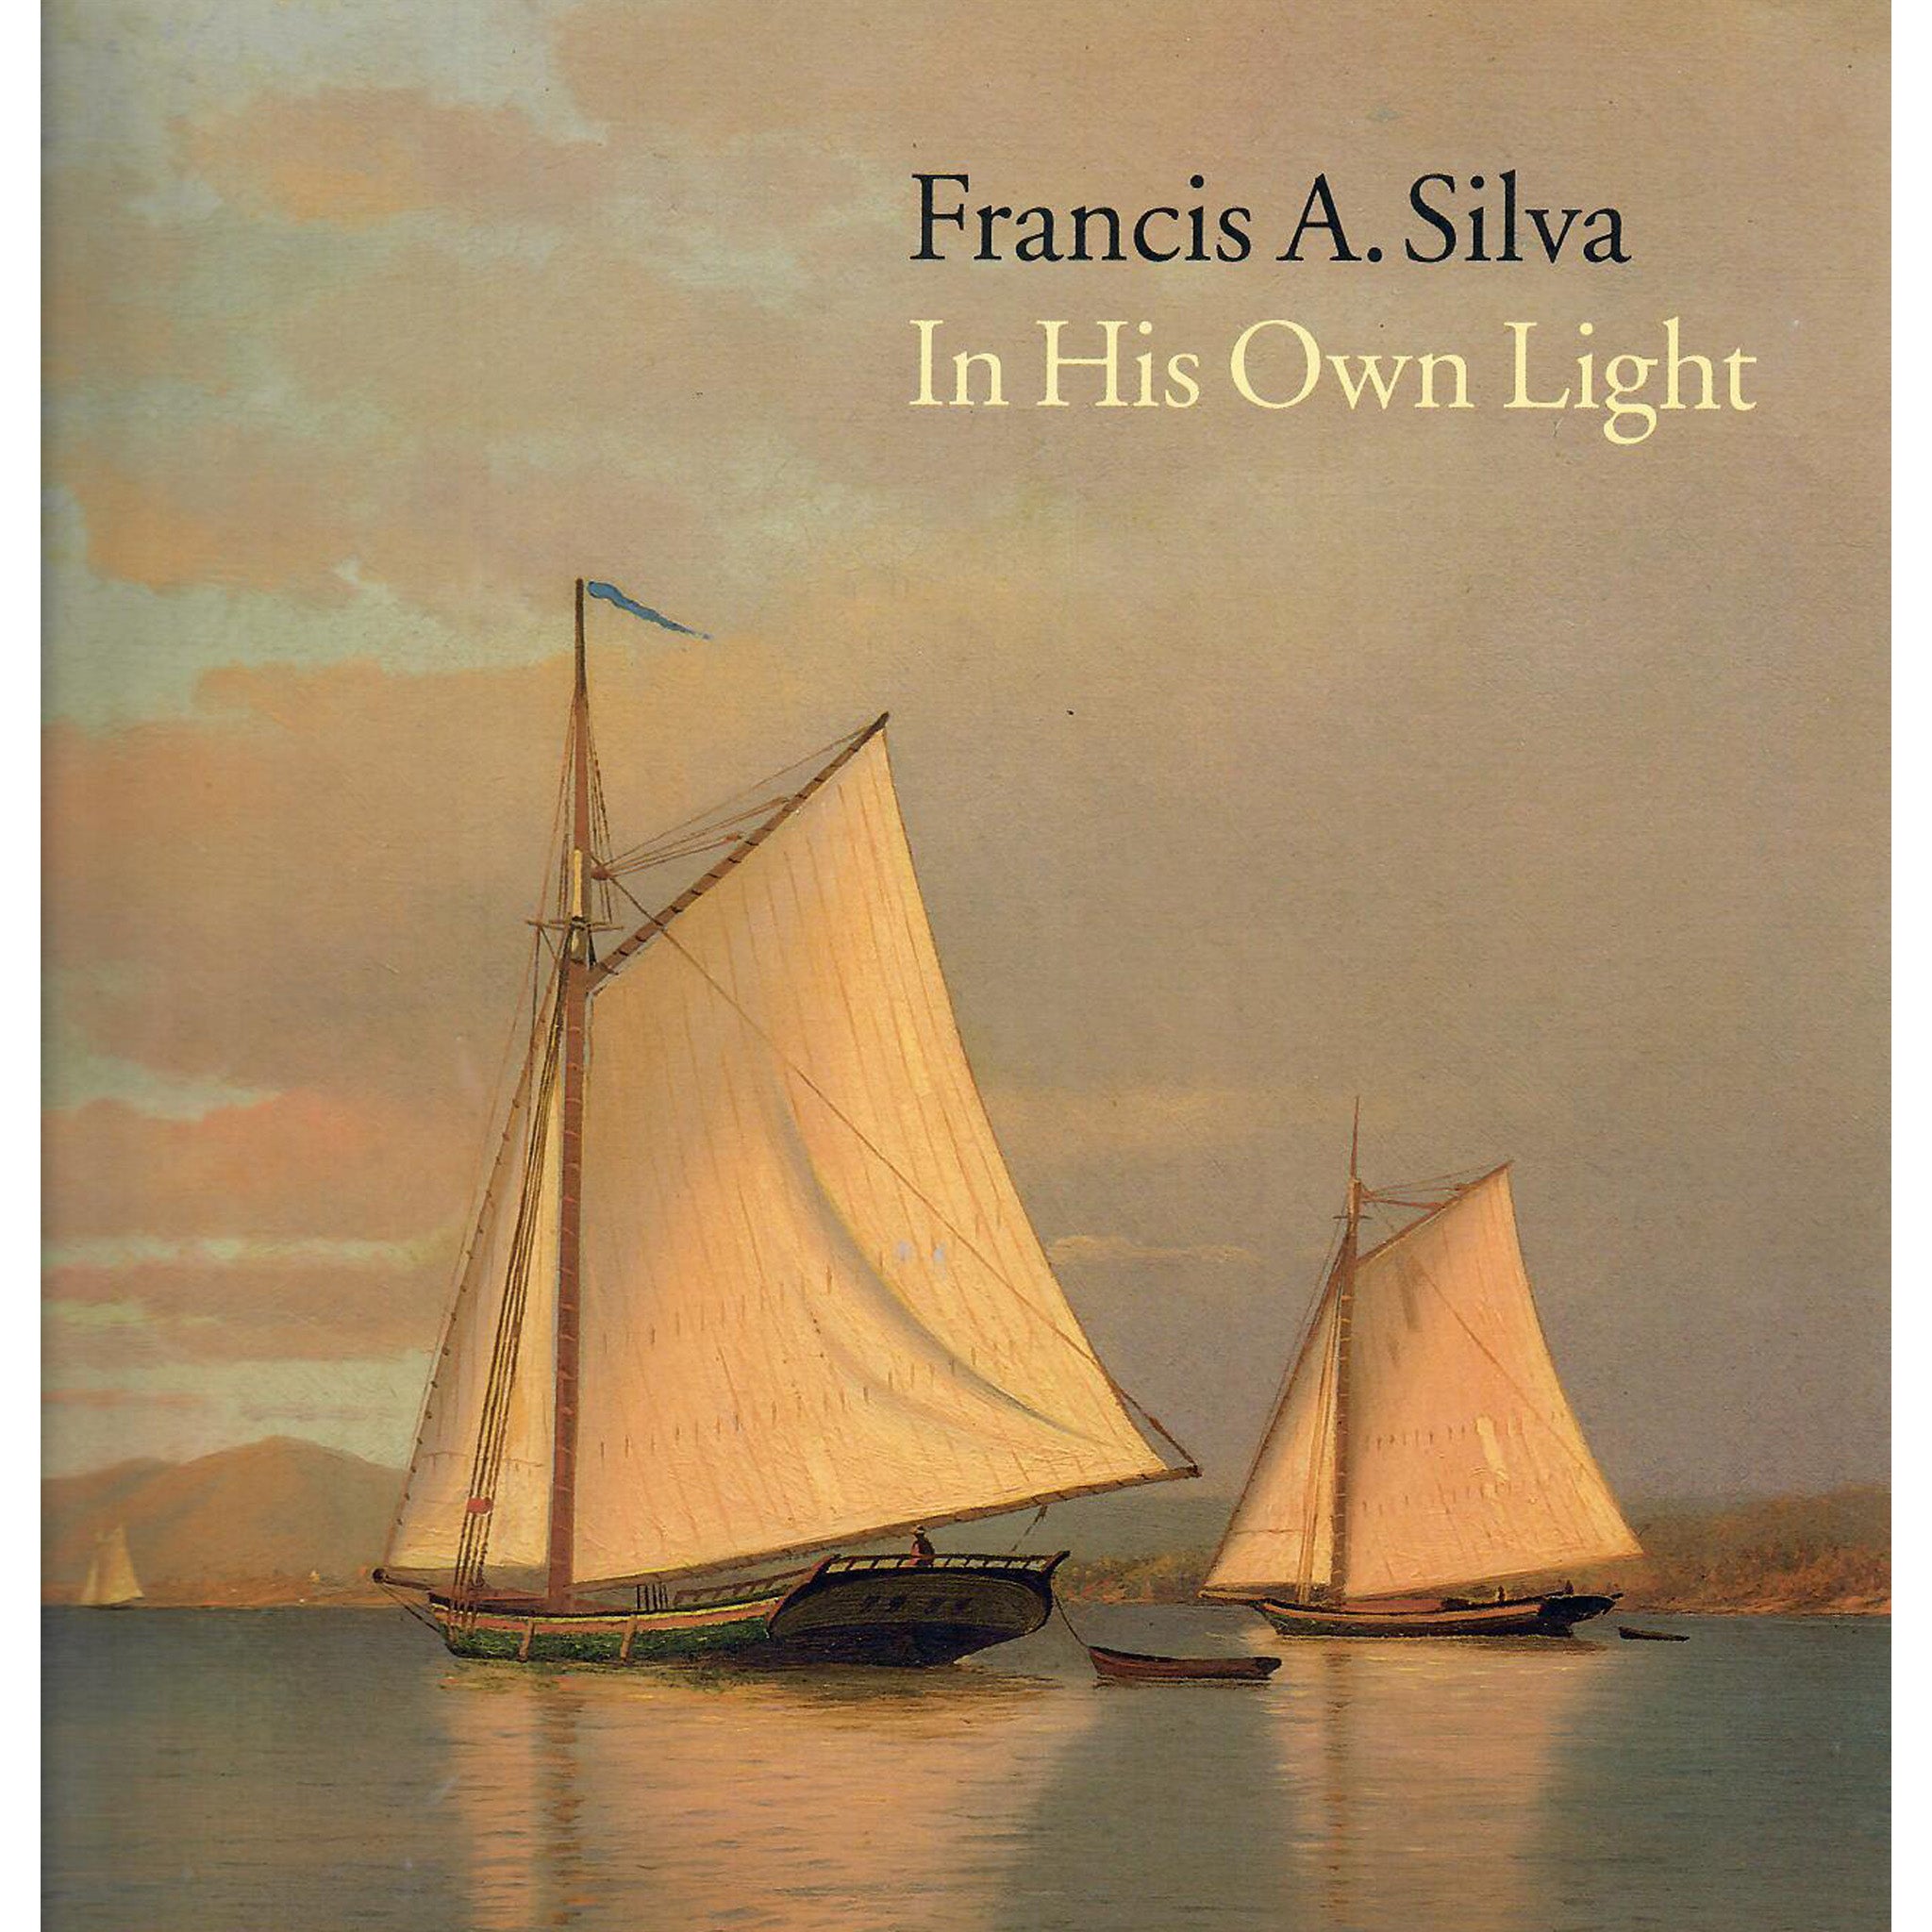 Francis A. Silva: In His Own Light